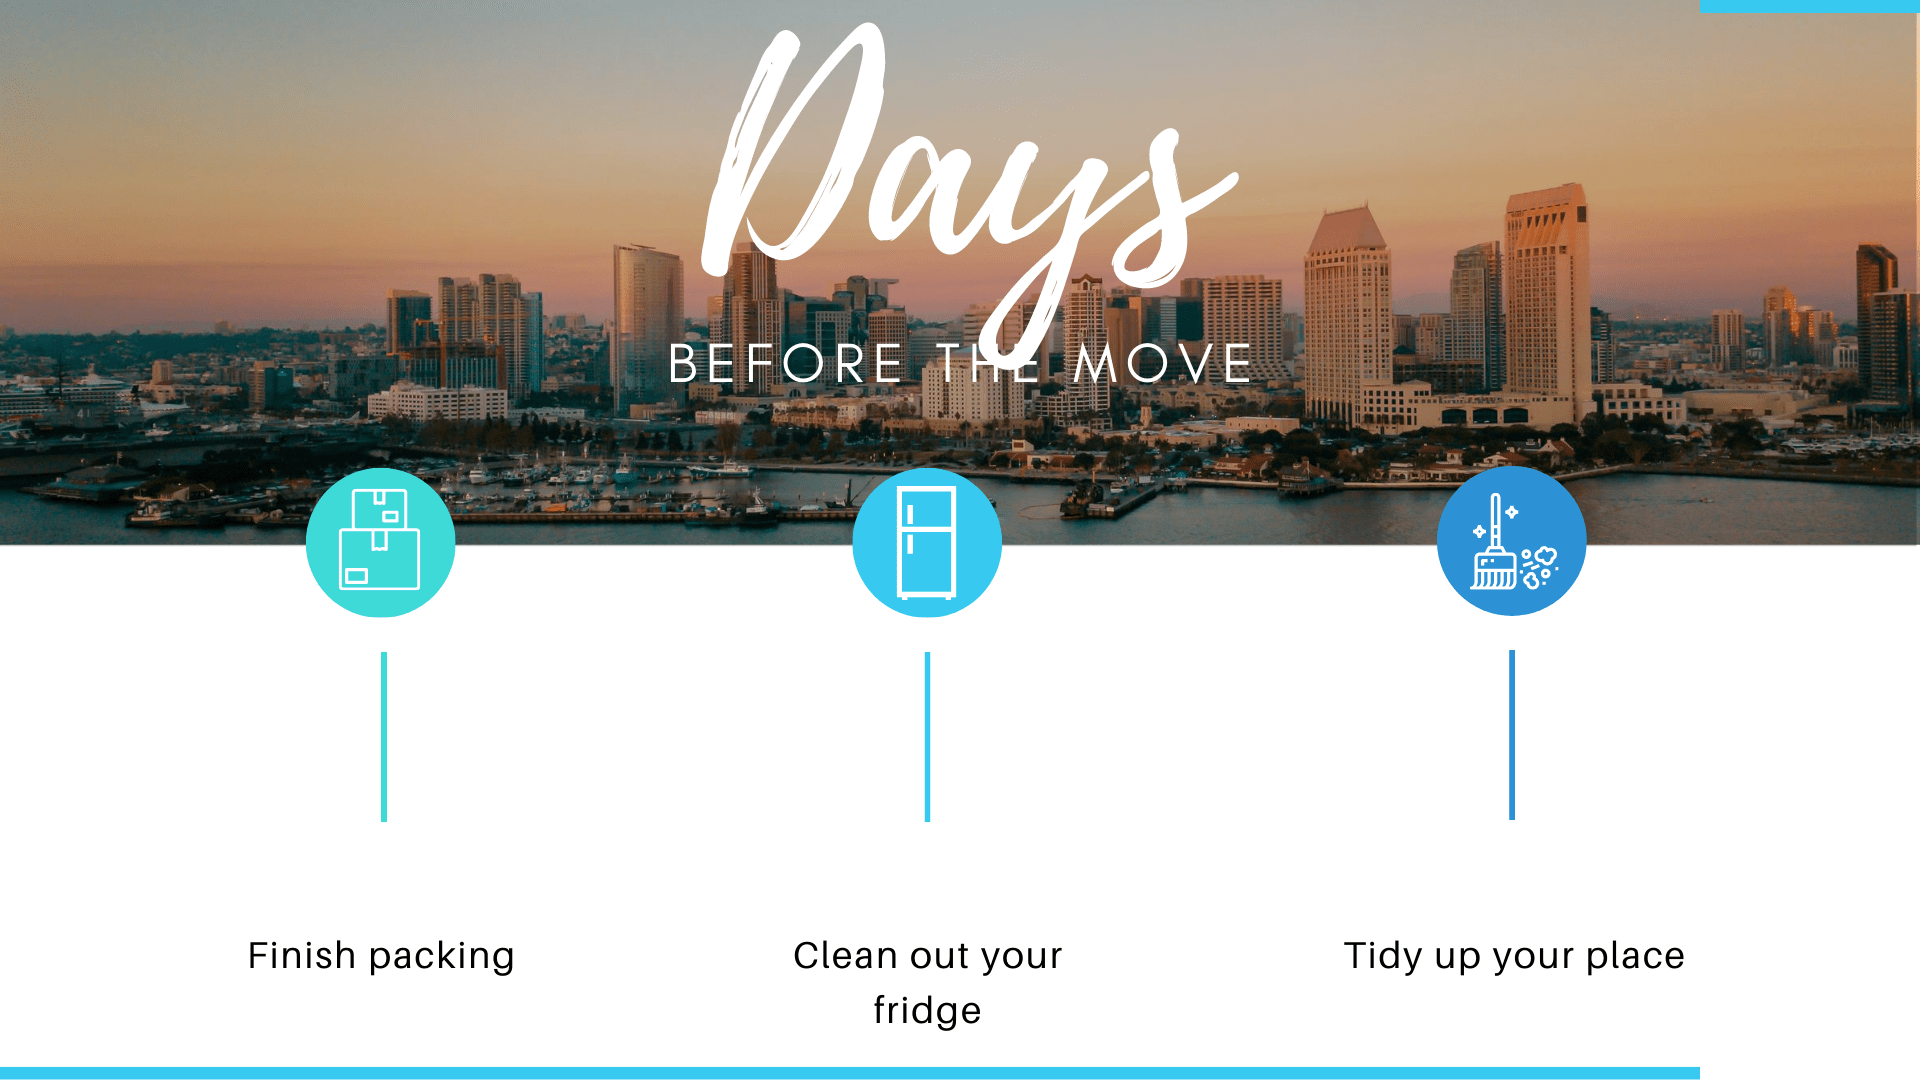 How to prepare days before your move